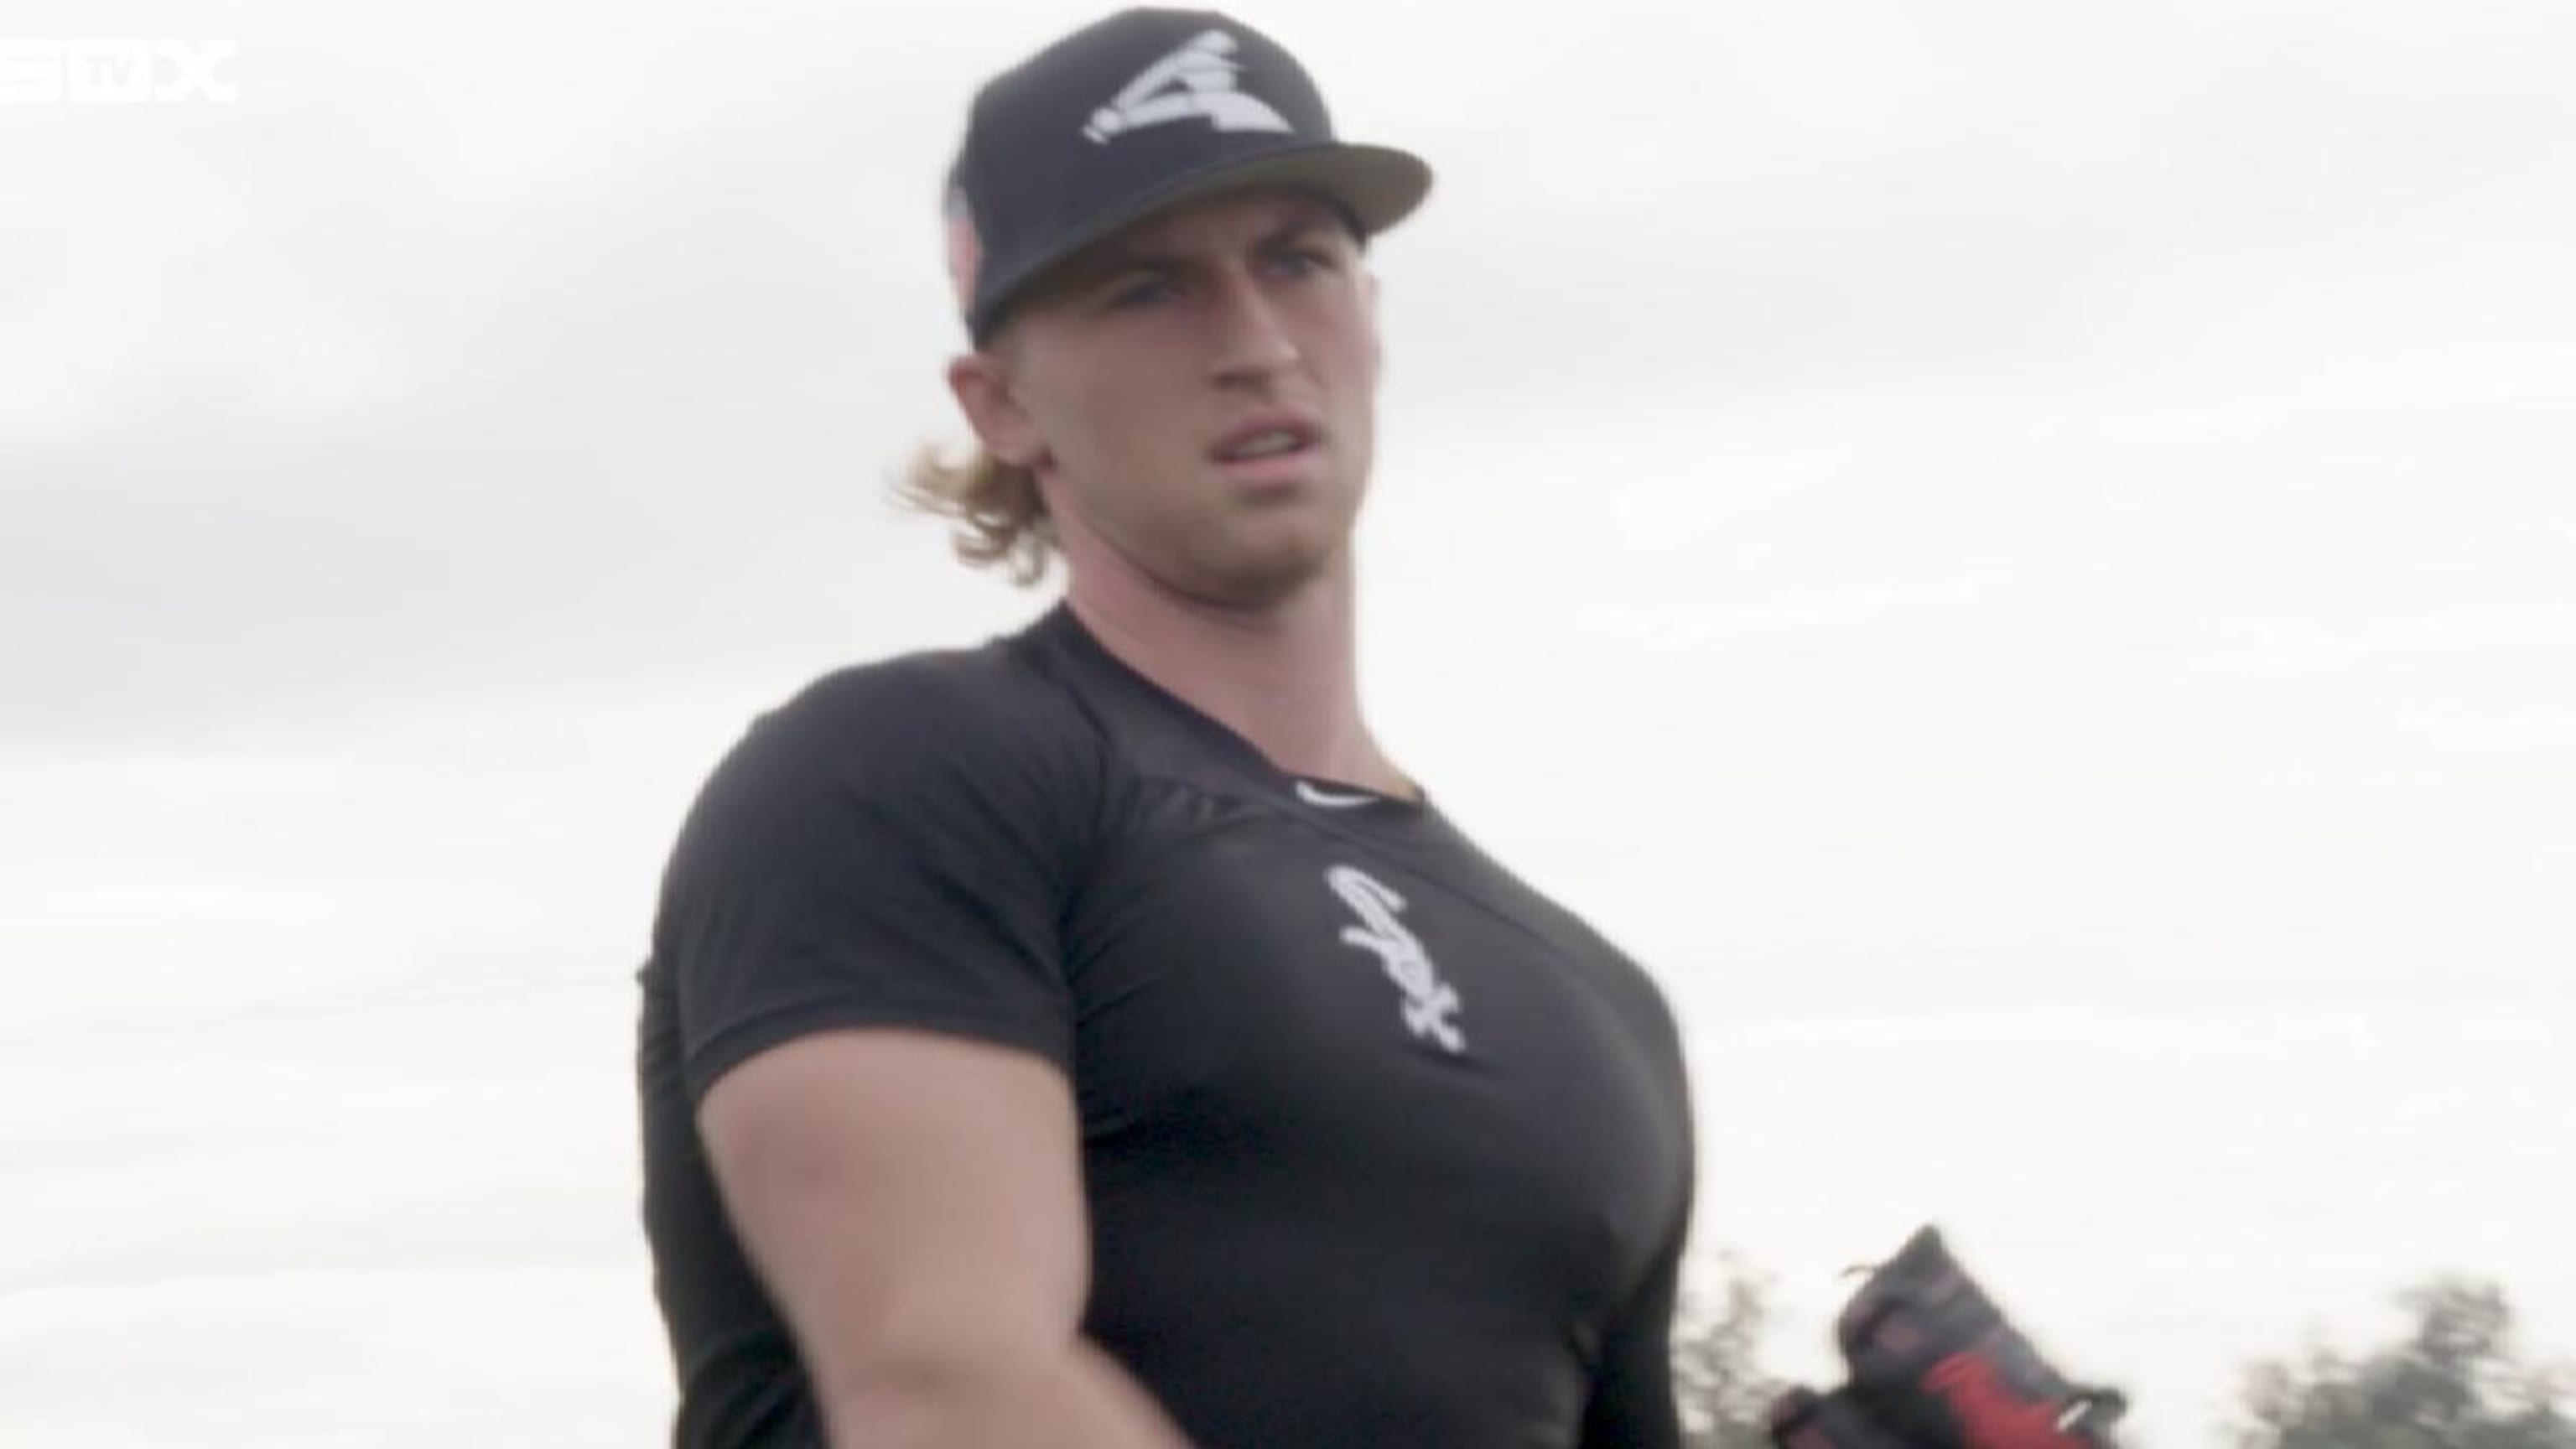 Top White Sox pitching prospect Michael Kopech has UCL tear